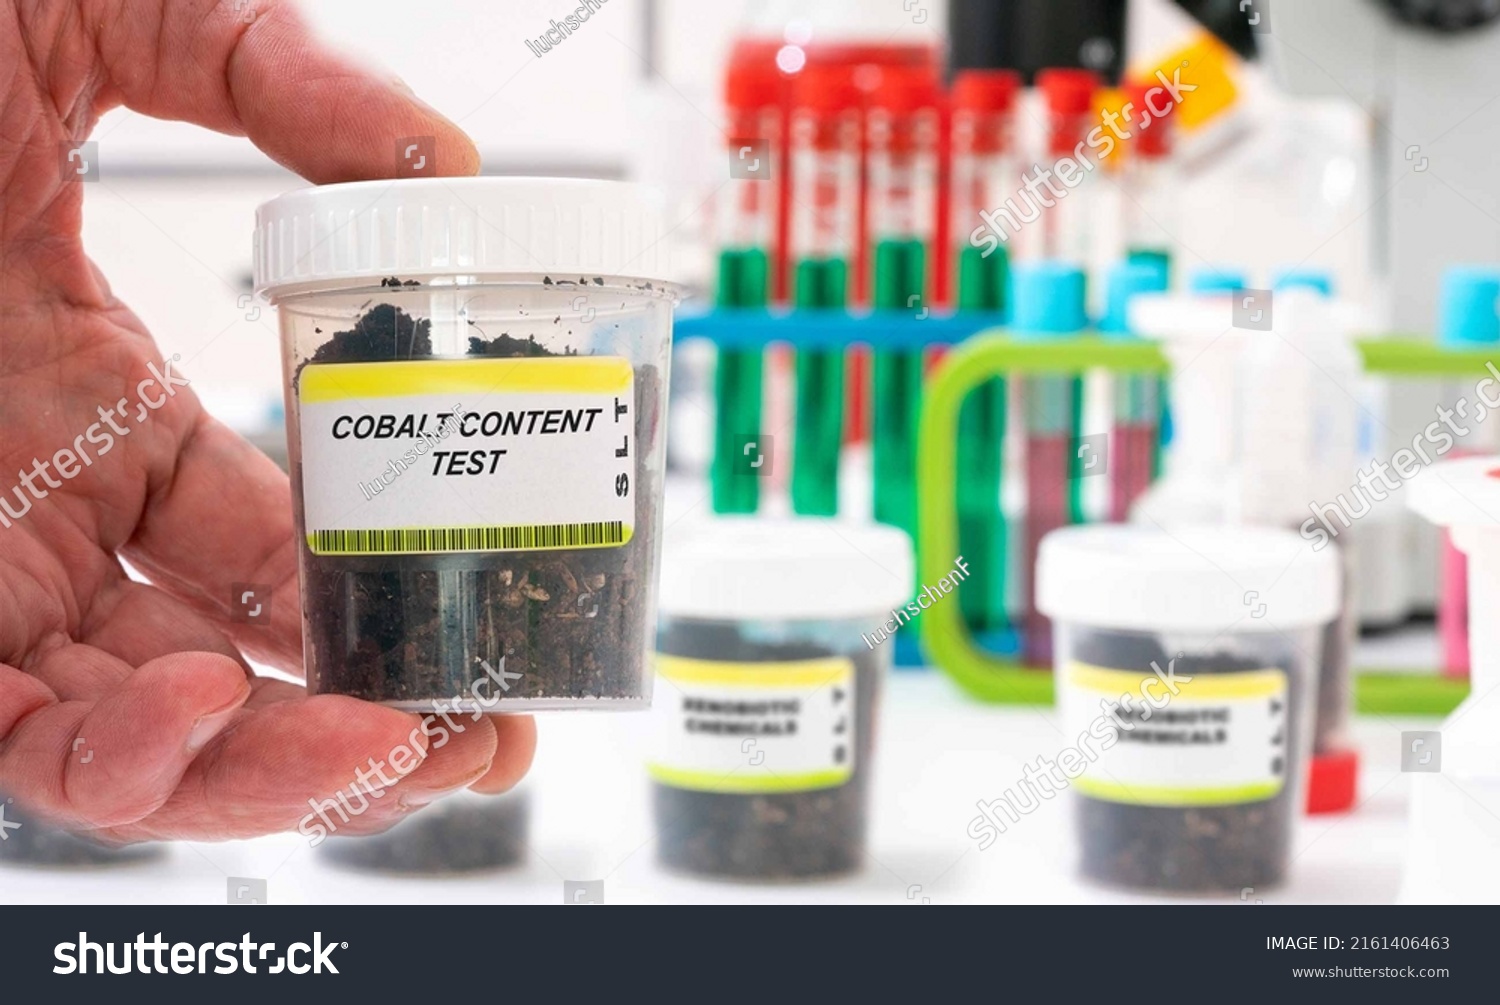 Cobalt. Cobalt content in soil sample in plastic container. Study of agricultural soil in a chemical laboratory #2161406463